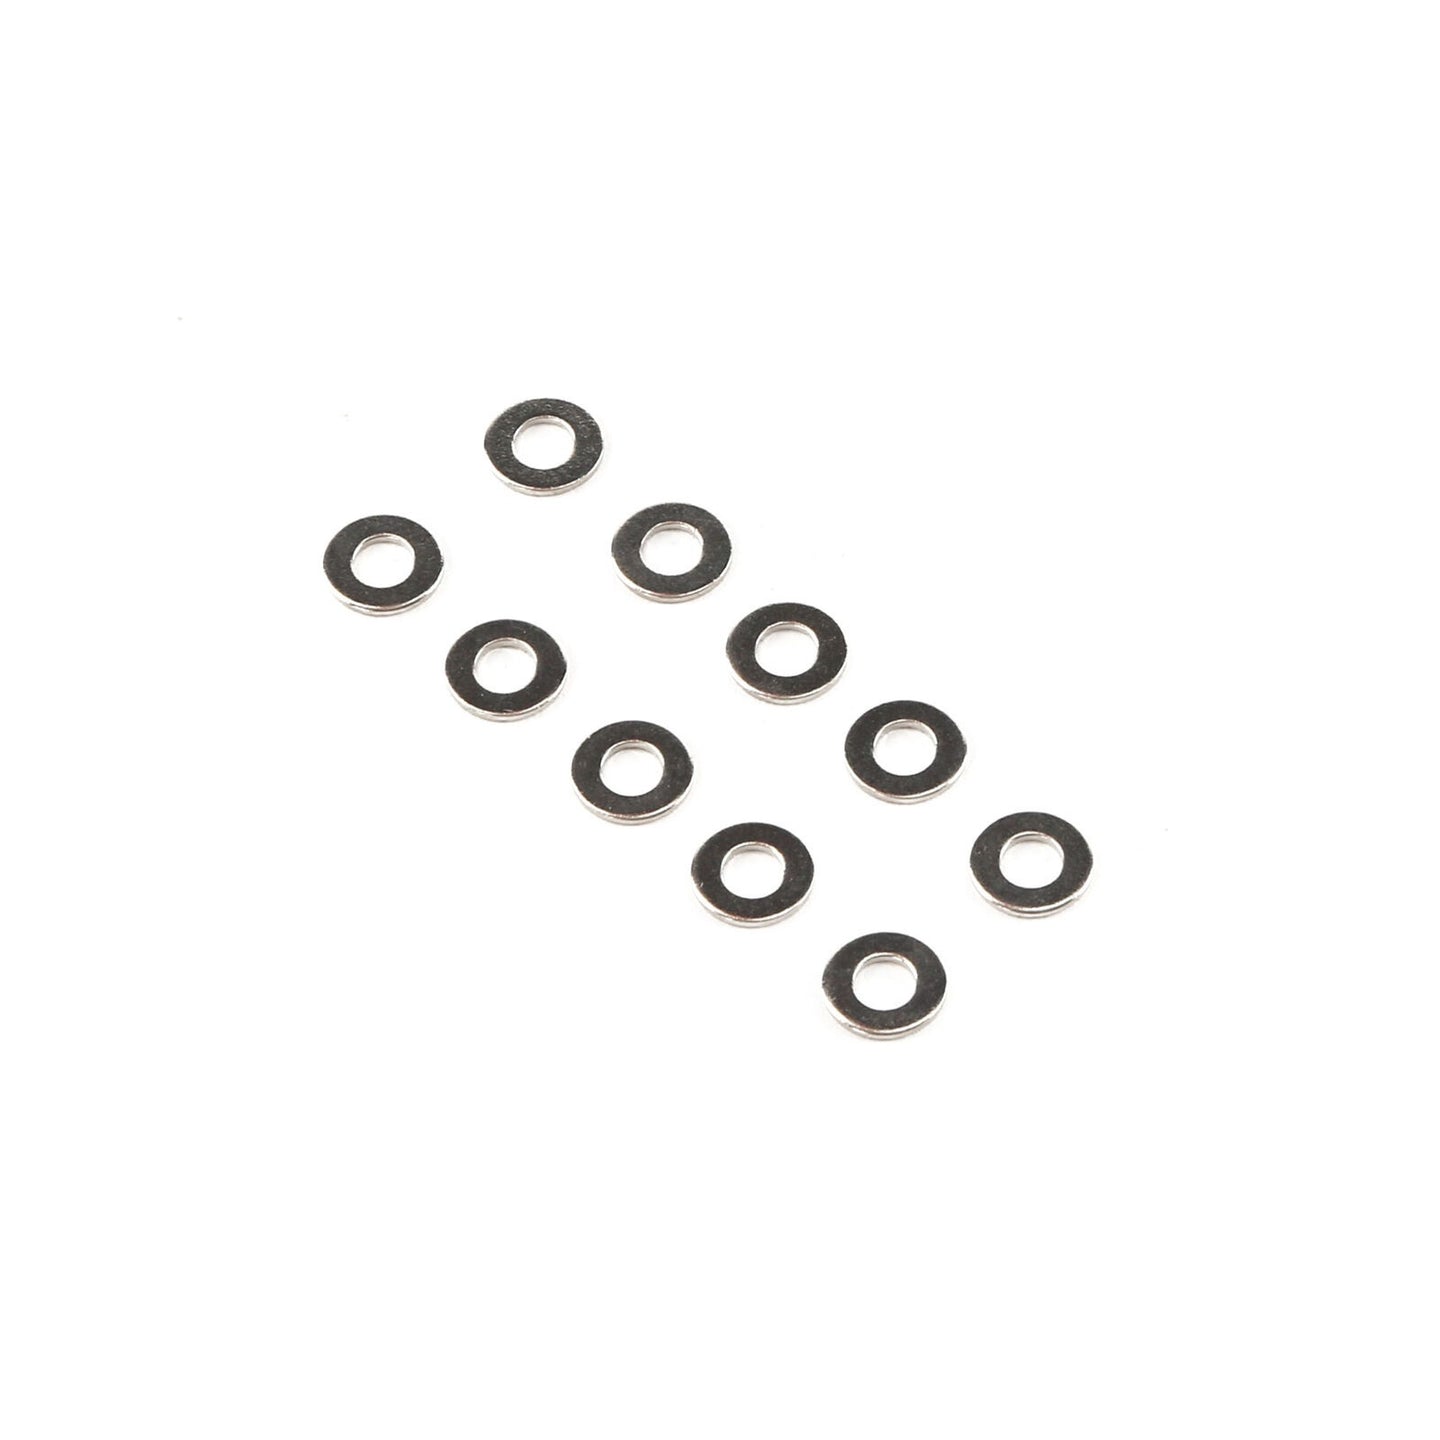 TLR256006 M4 WASHERS